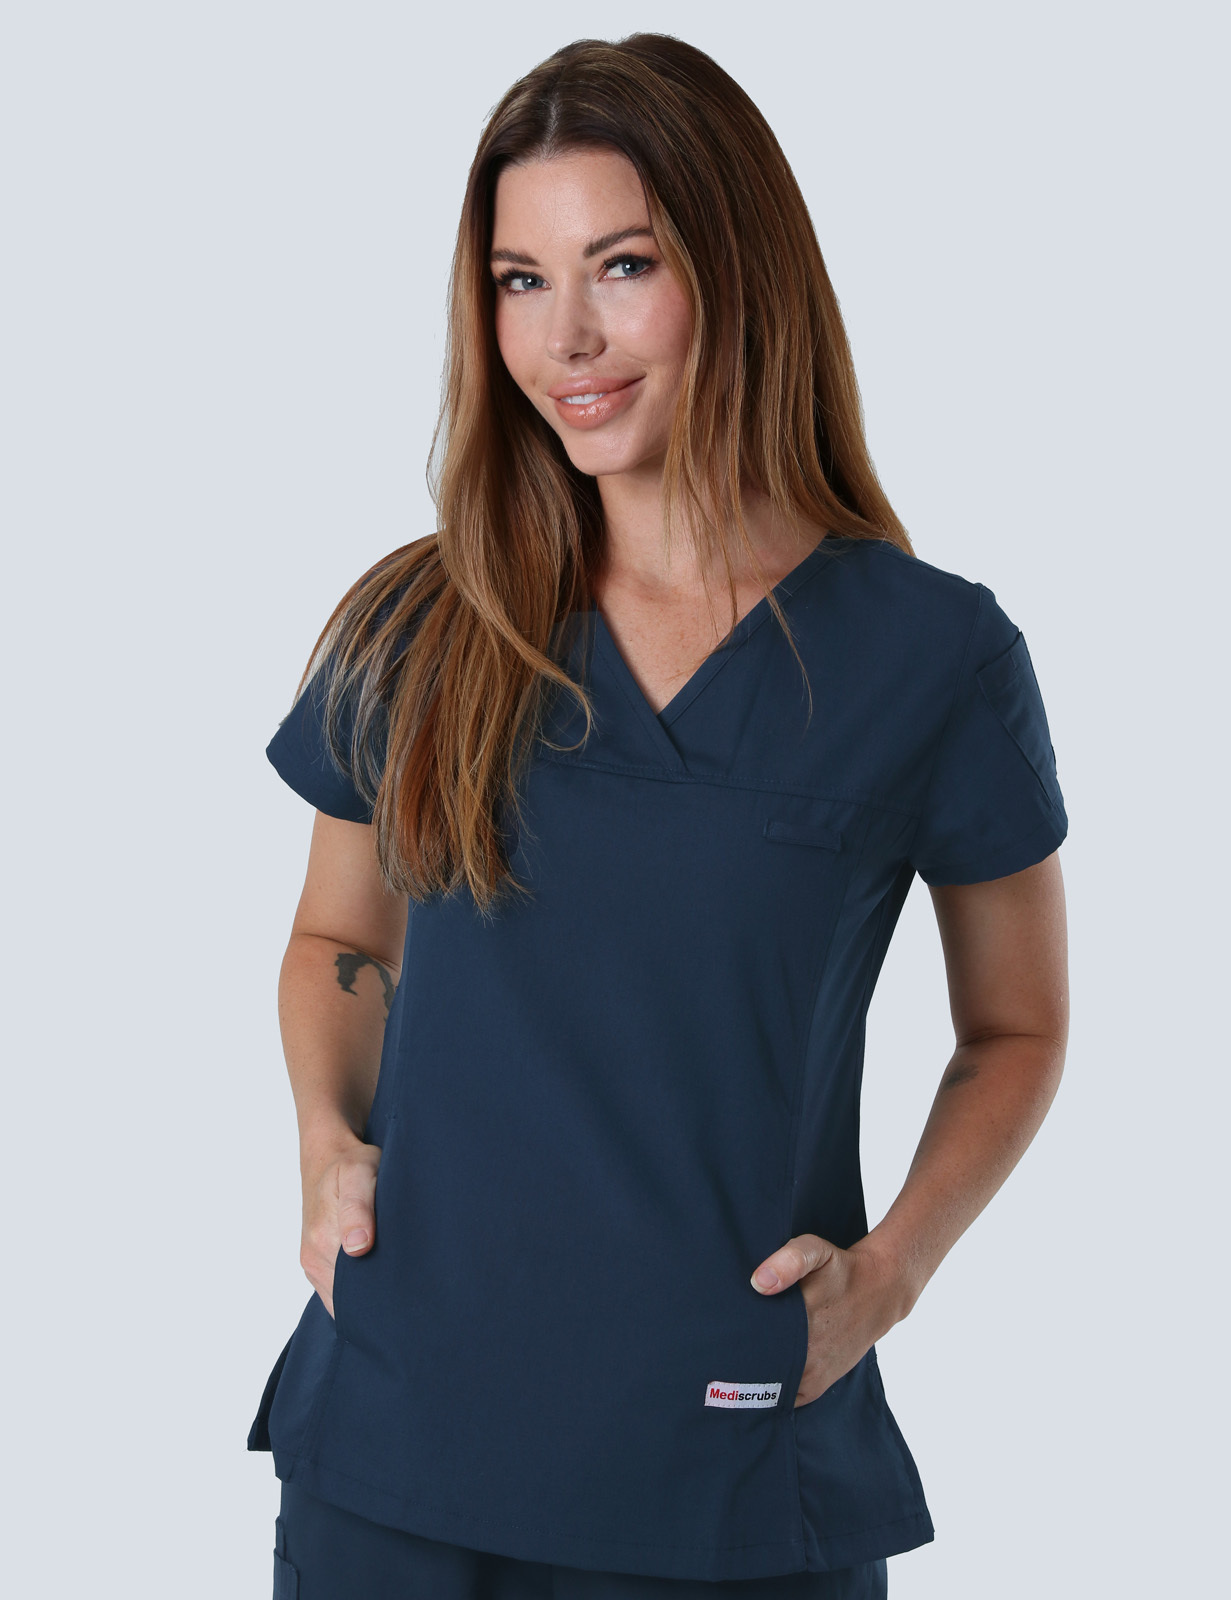 The Alfred Hospital - 2F Medical Short Stay - Nursing (Women's Fit Solid Scrub Top in Navy incl Logos)